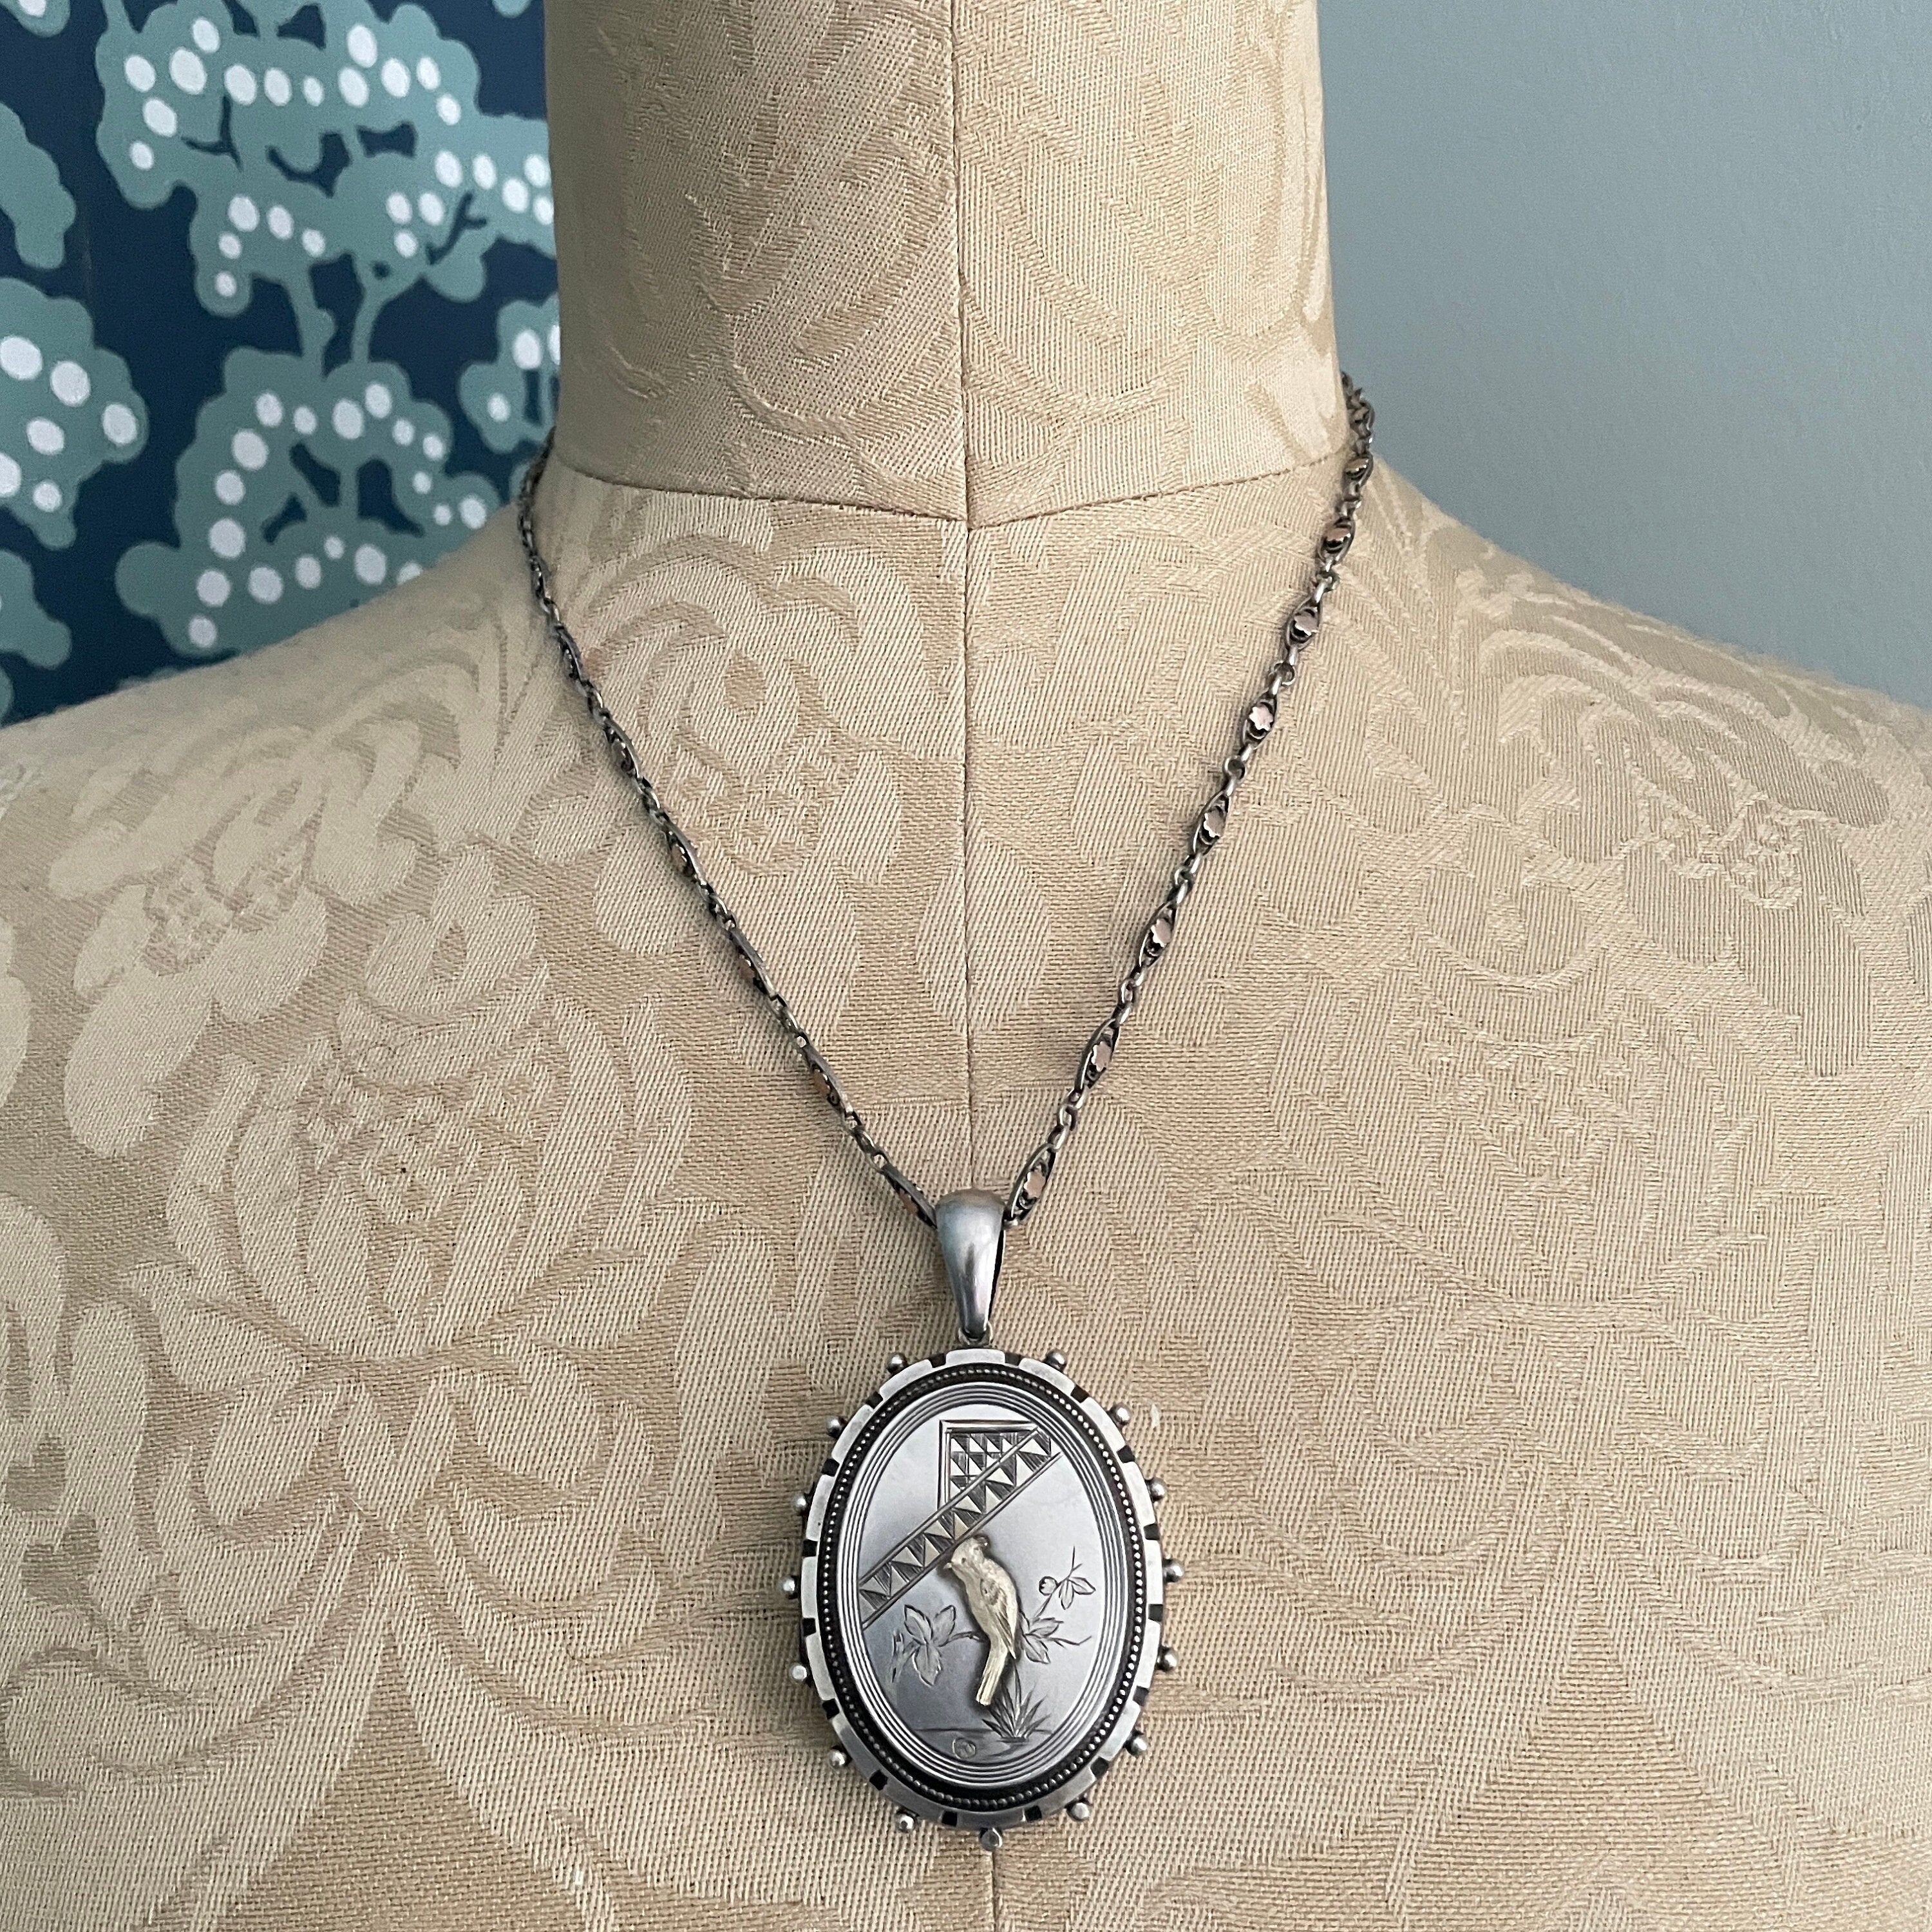 Victorian, Aesthetic Movement Large Sterling Silver Locket, With Bird Motif